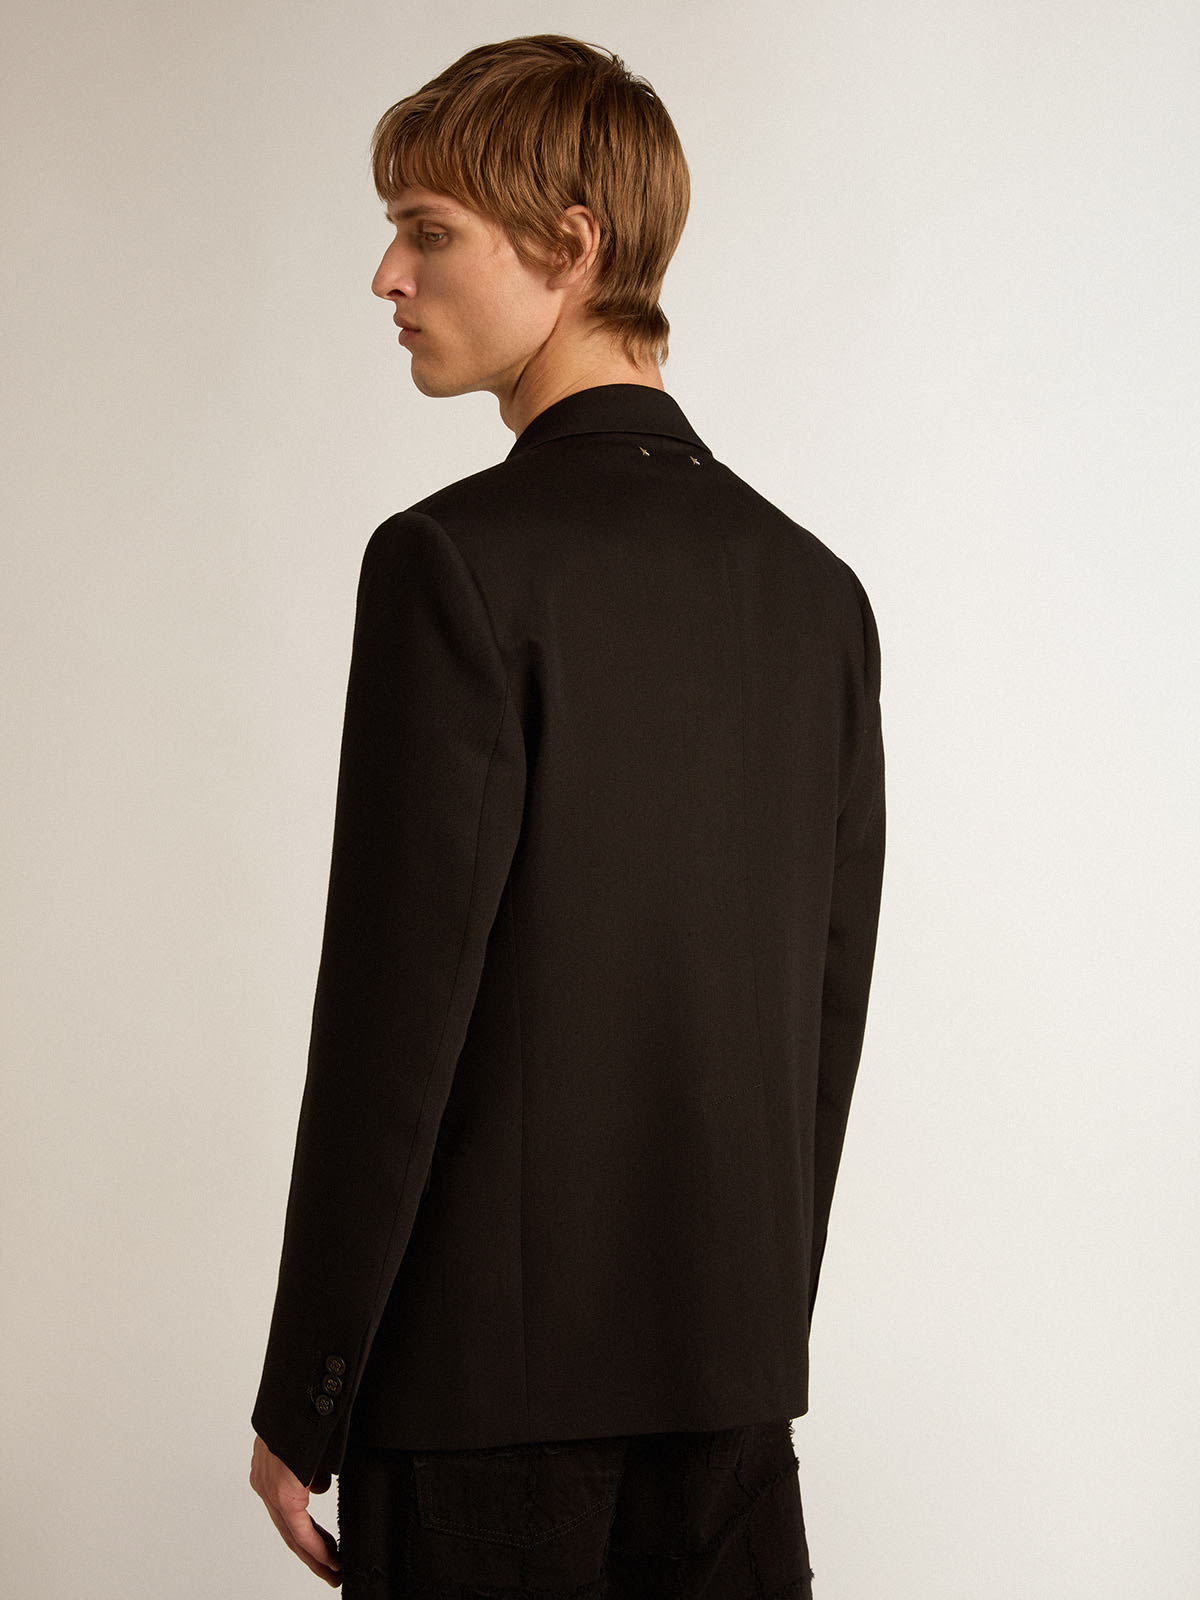 Golden Goose - Black wool and viscose blend single-breasted blazer in 